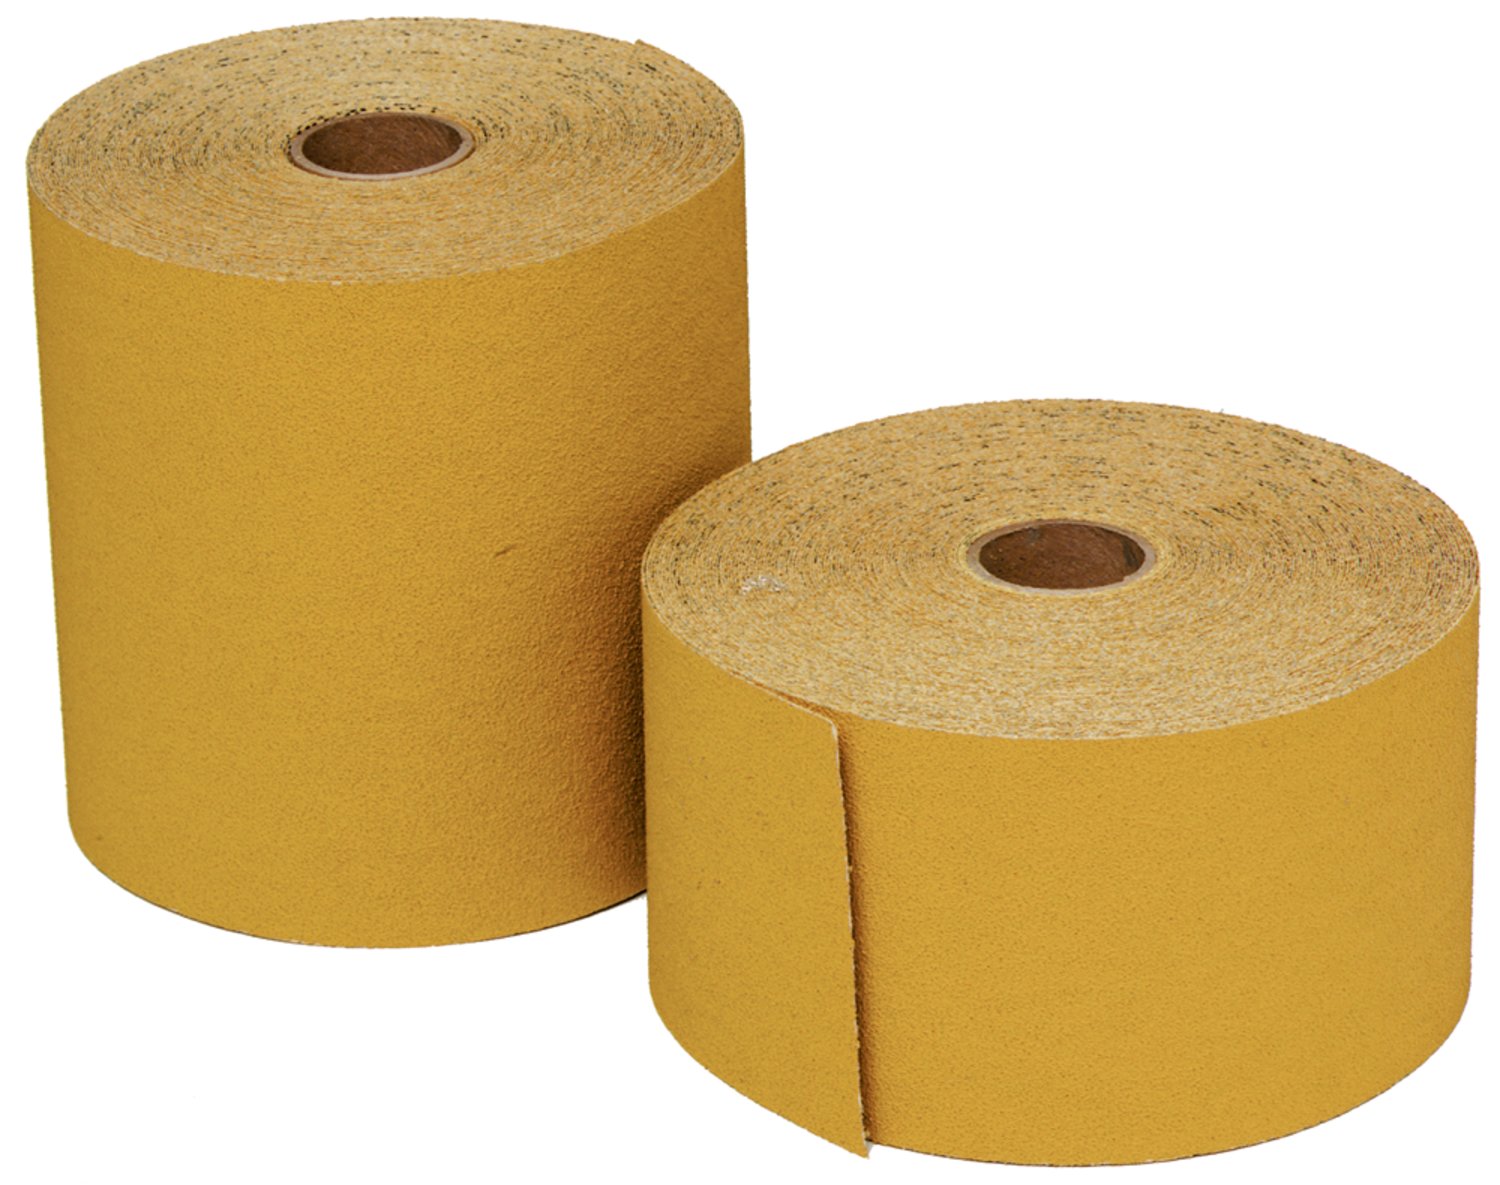 7100111143 - 3M Stikit Gold Paper Roll 216U, P320 A-weight, Config